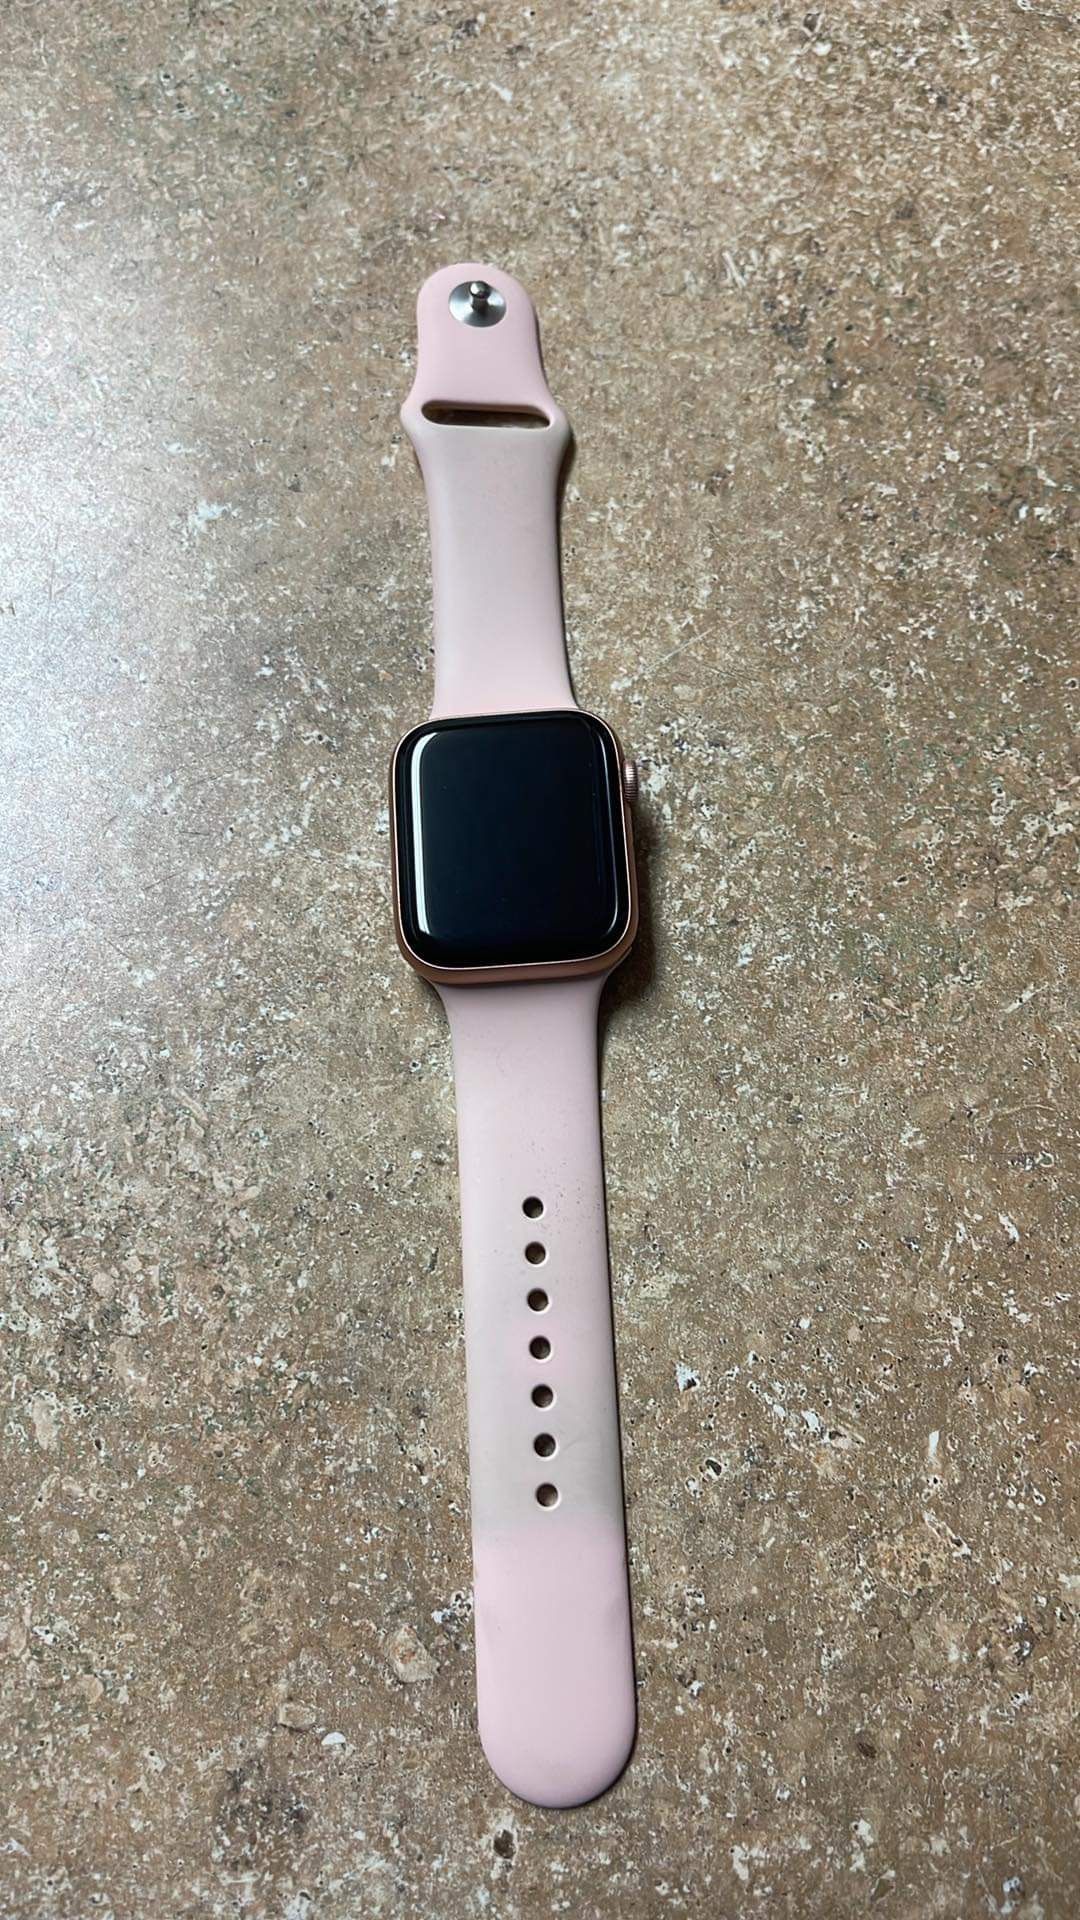 Apple Watch Series 6 44mm (Firm On price)